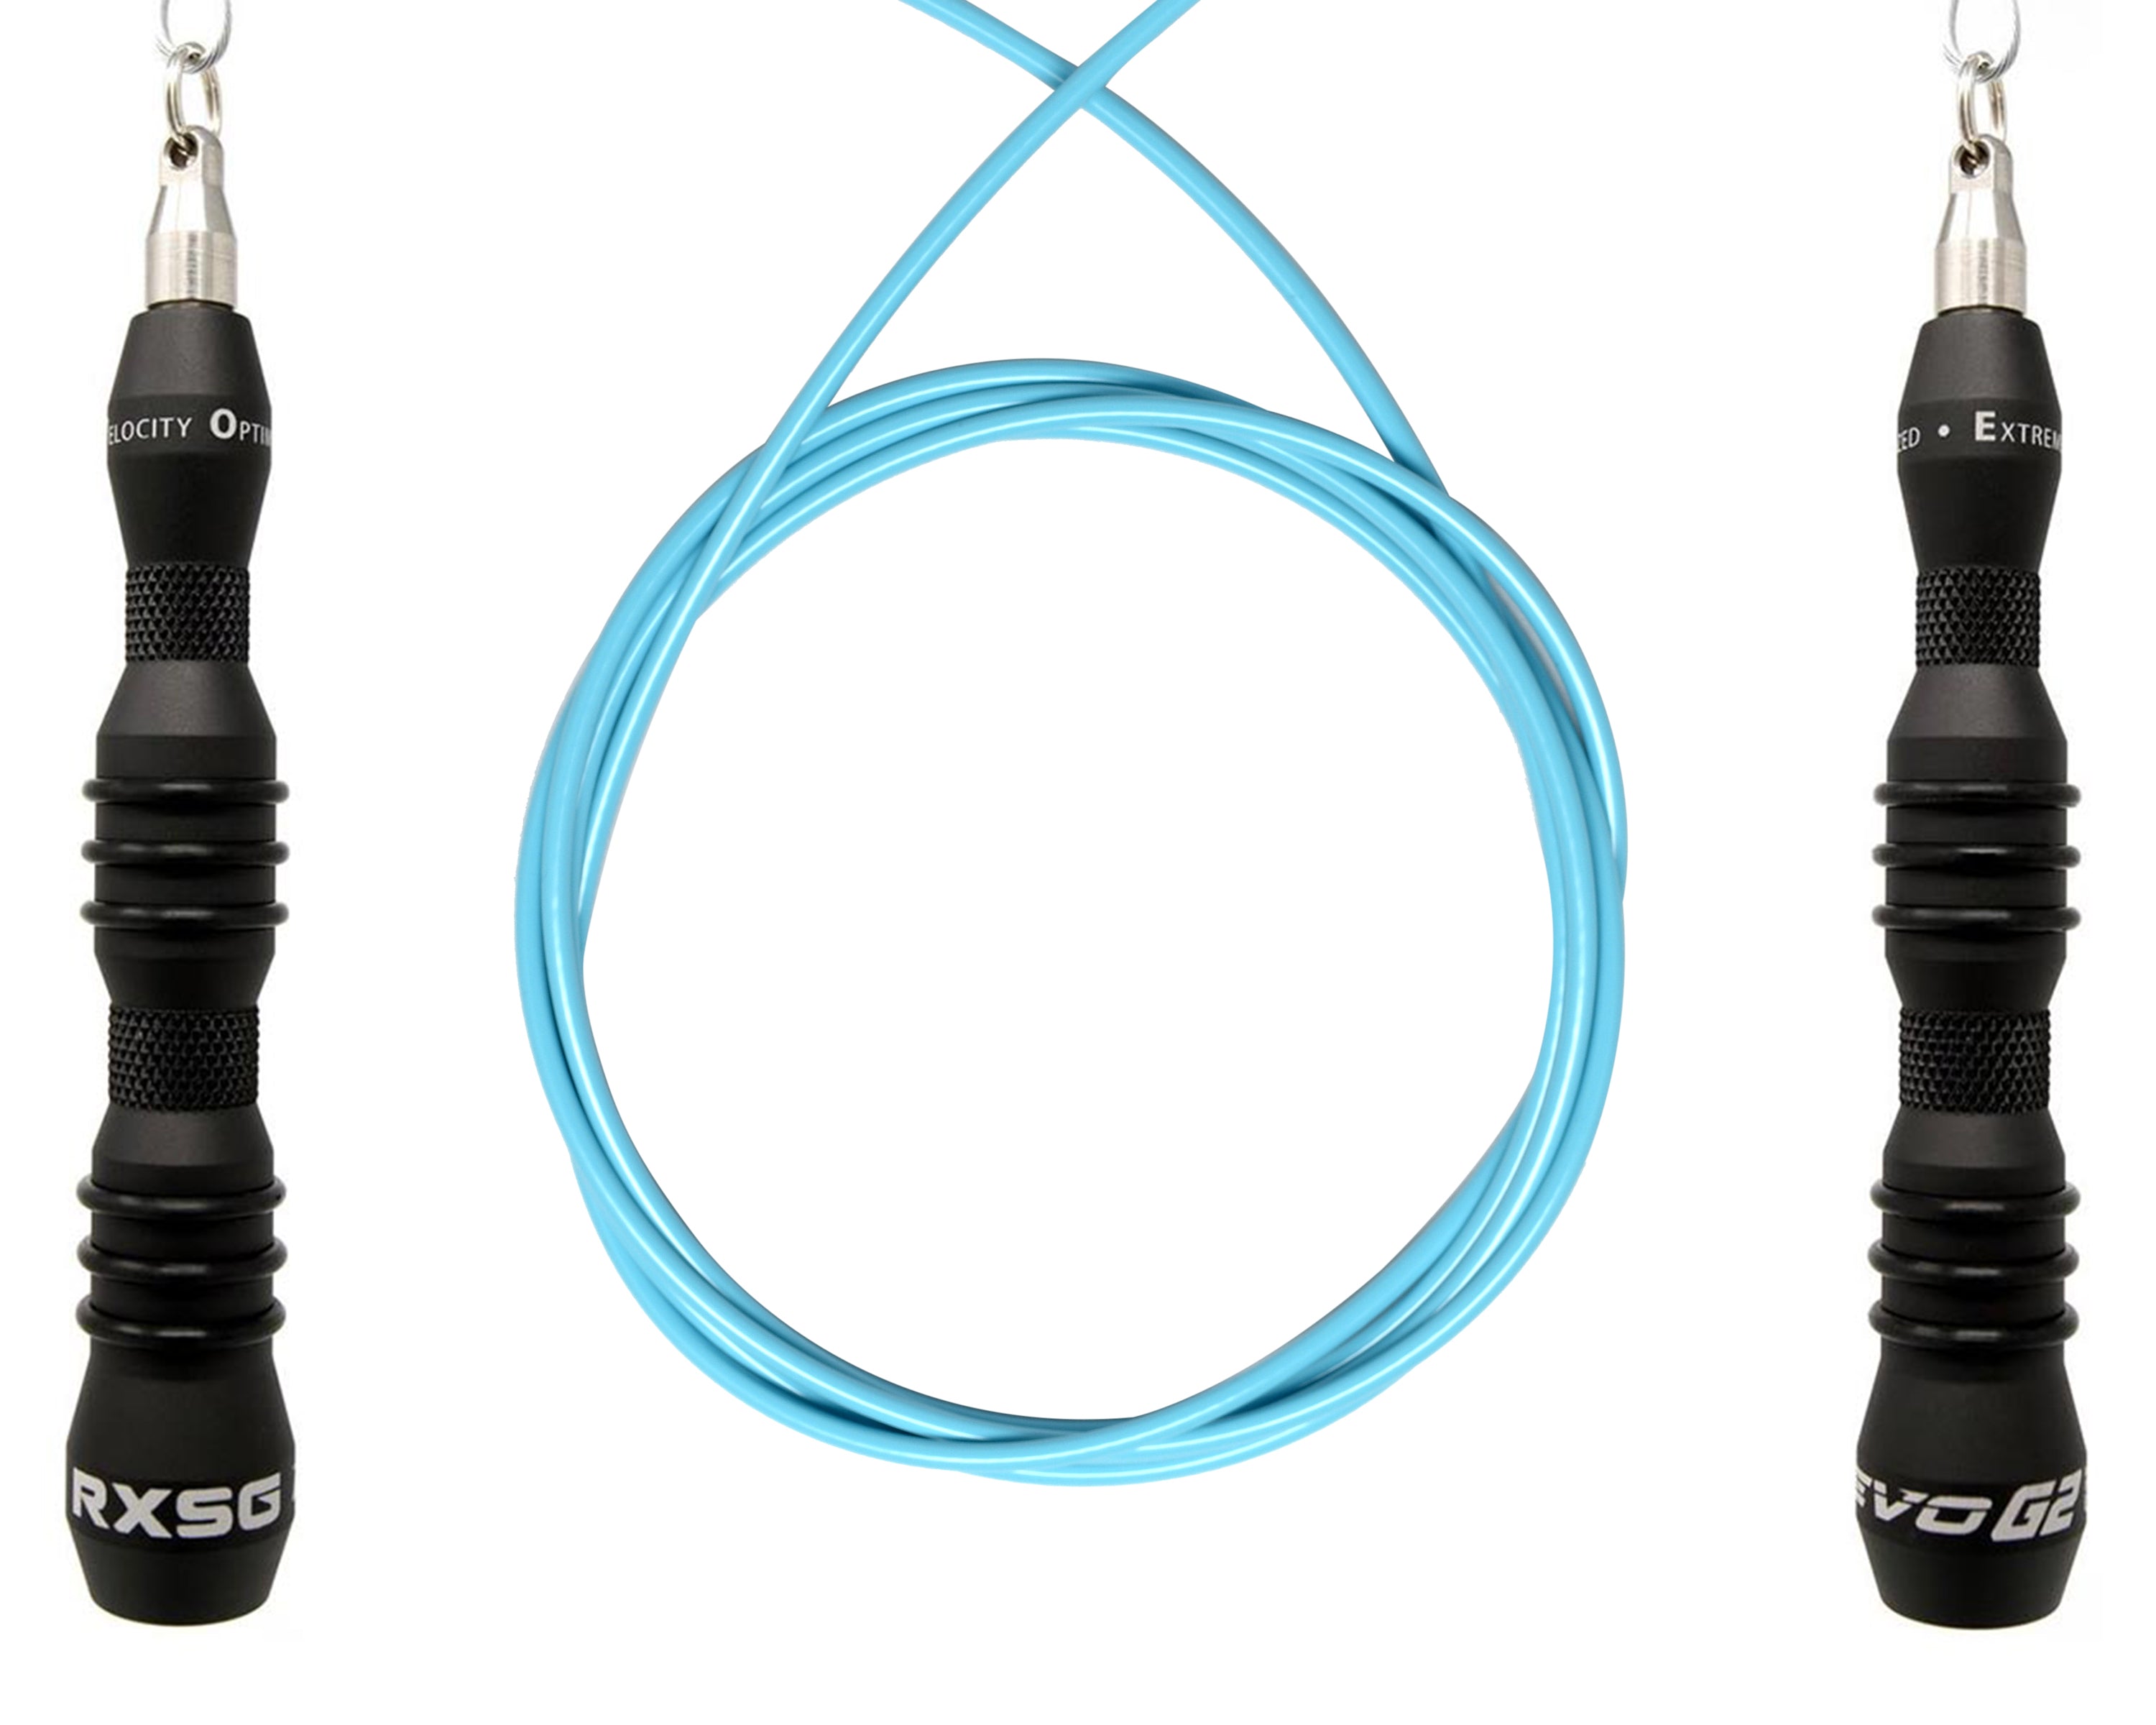 EVO G2 Speed Rope with Teal Cable